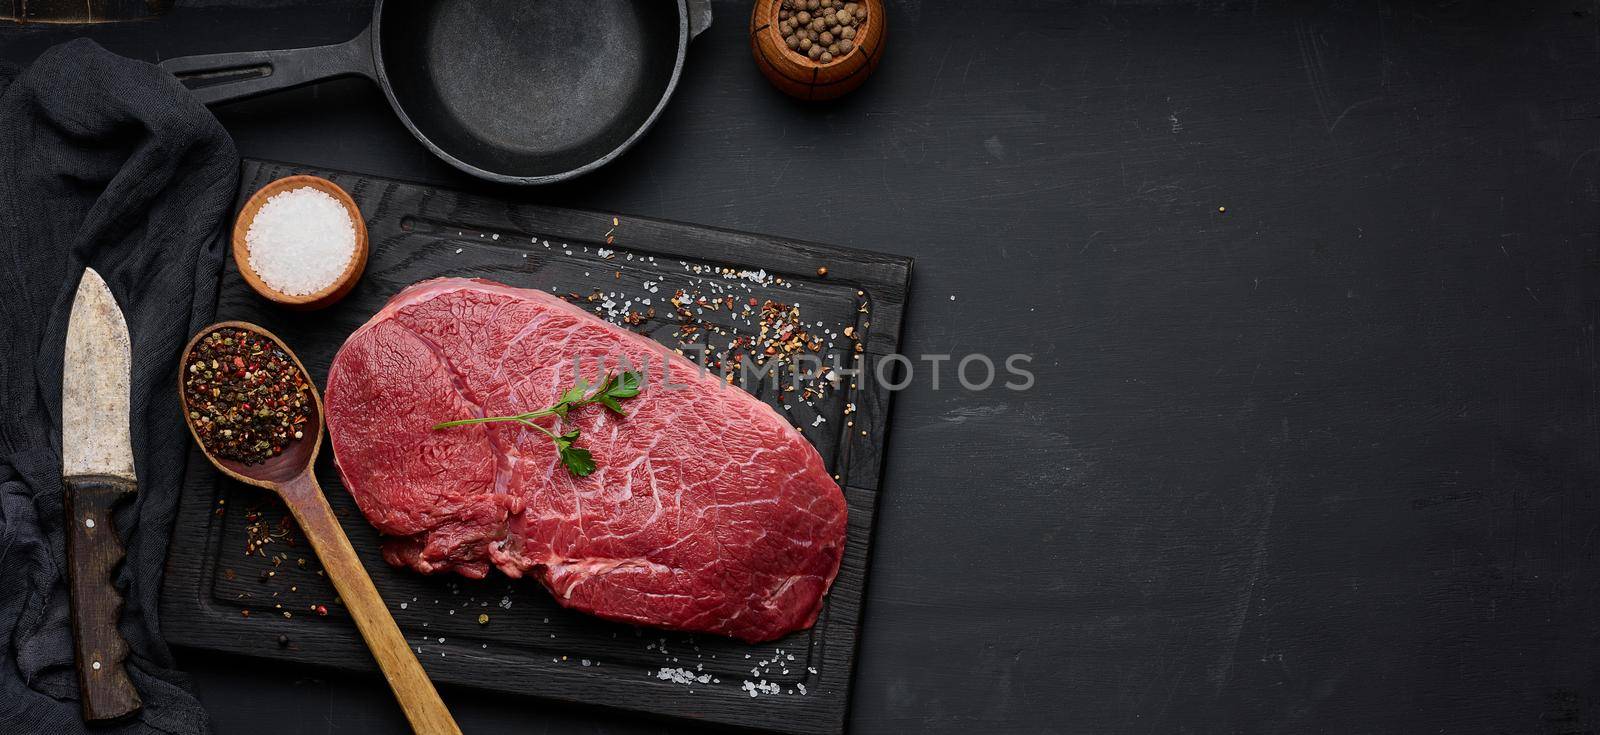 Raw beef tenderloin lies on a cutting board and spices for cooking on a black table, top view by ndanko